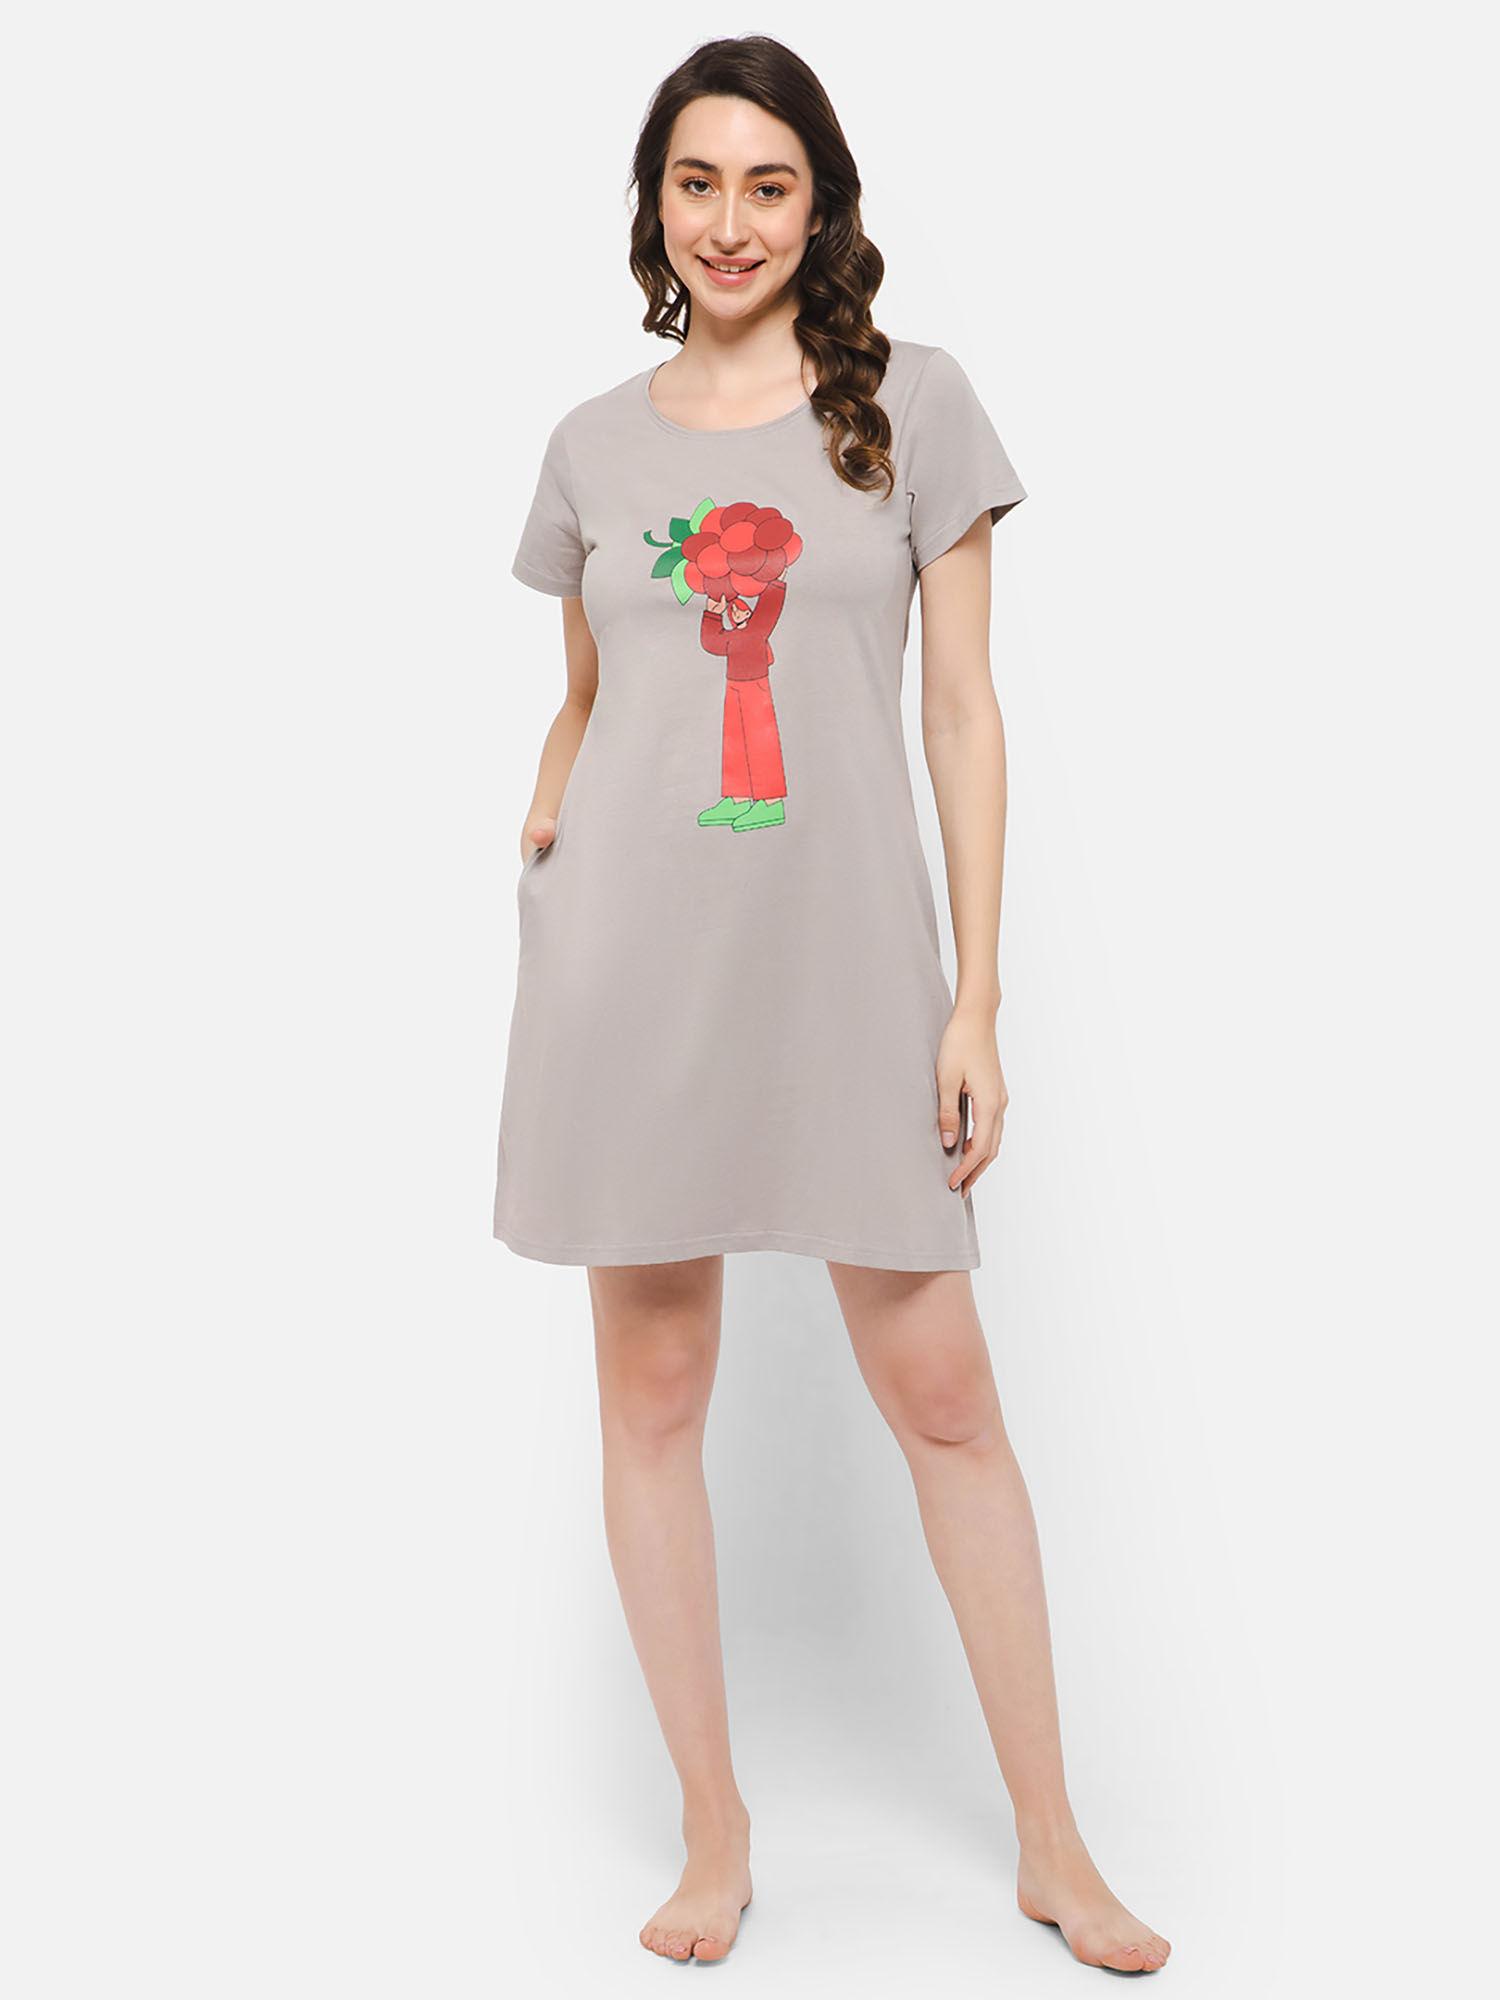 tutti fruity short night dress in taupe - 100% cotton